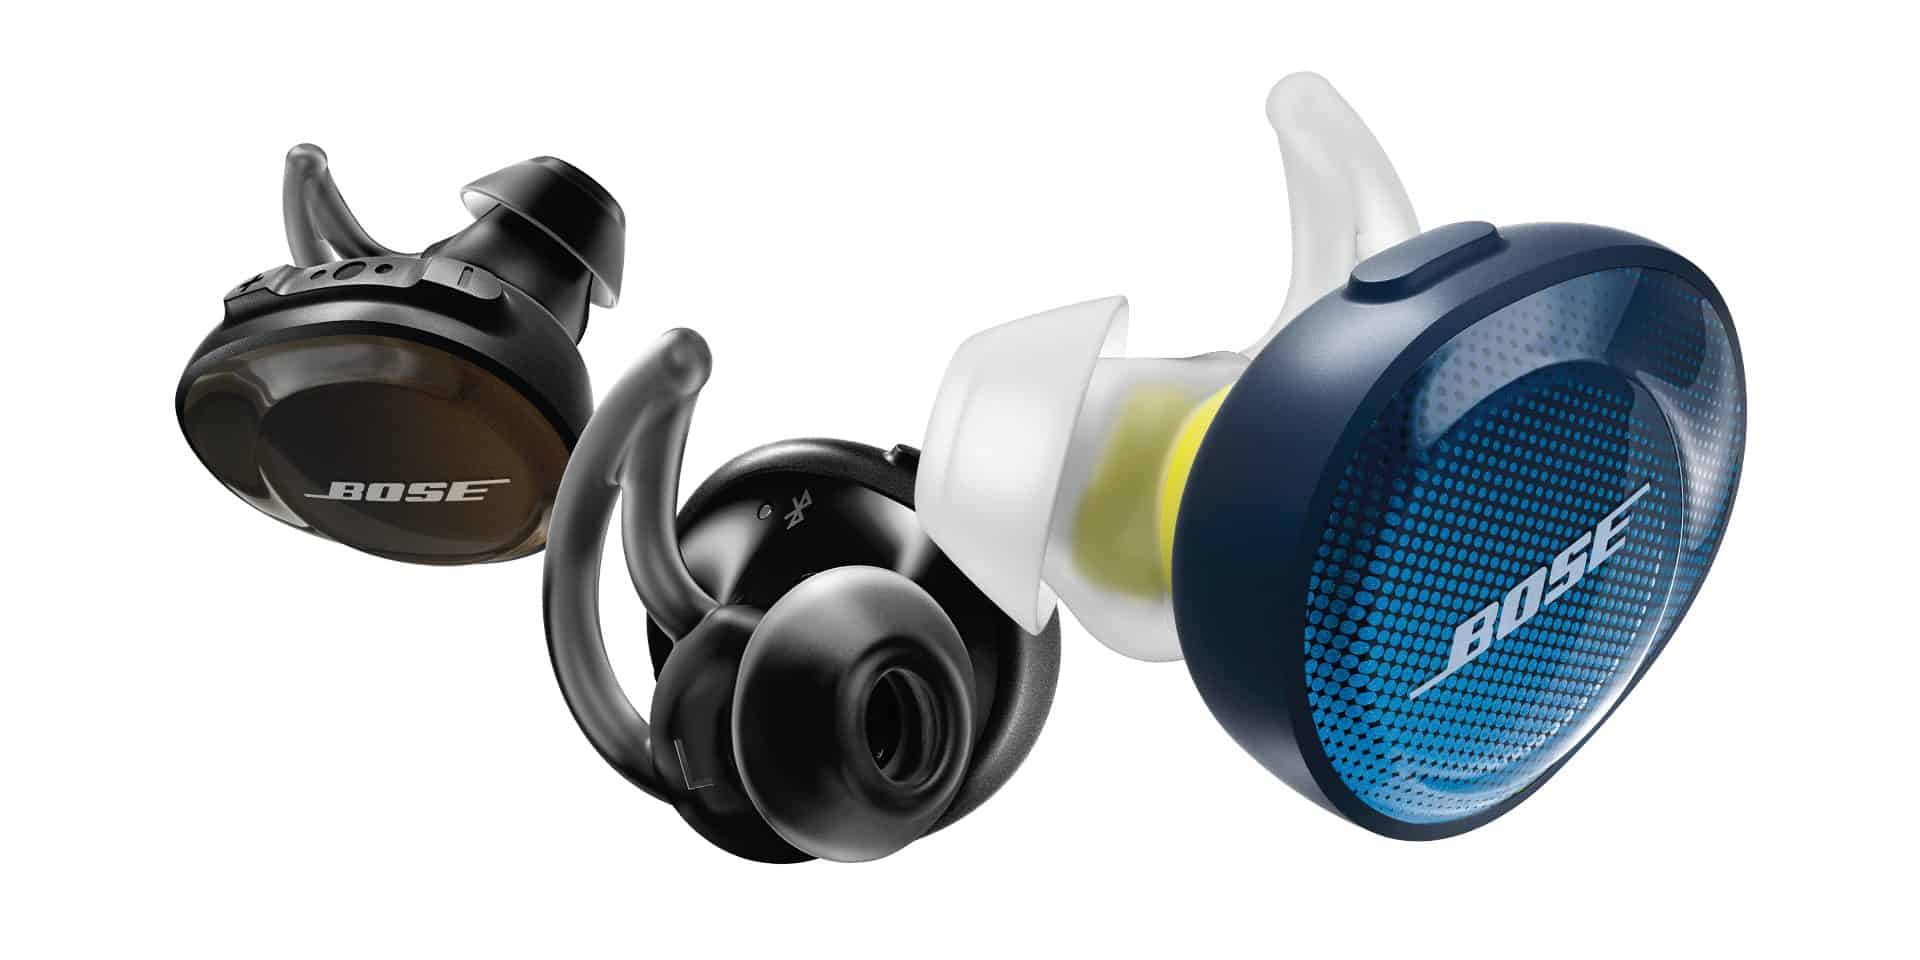 New Bose SoundSport Free Truly Wireless Earbuds to Rival Apple AirPods